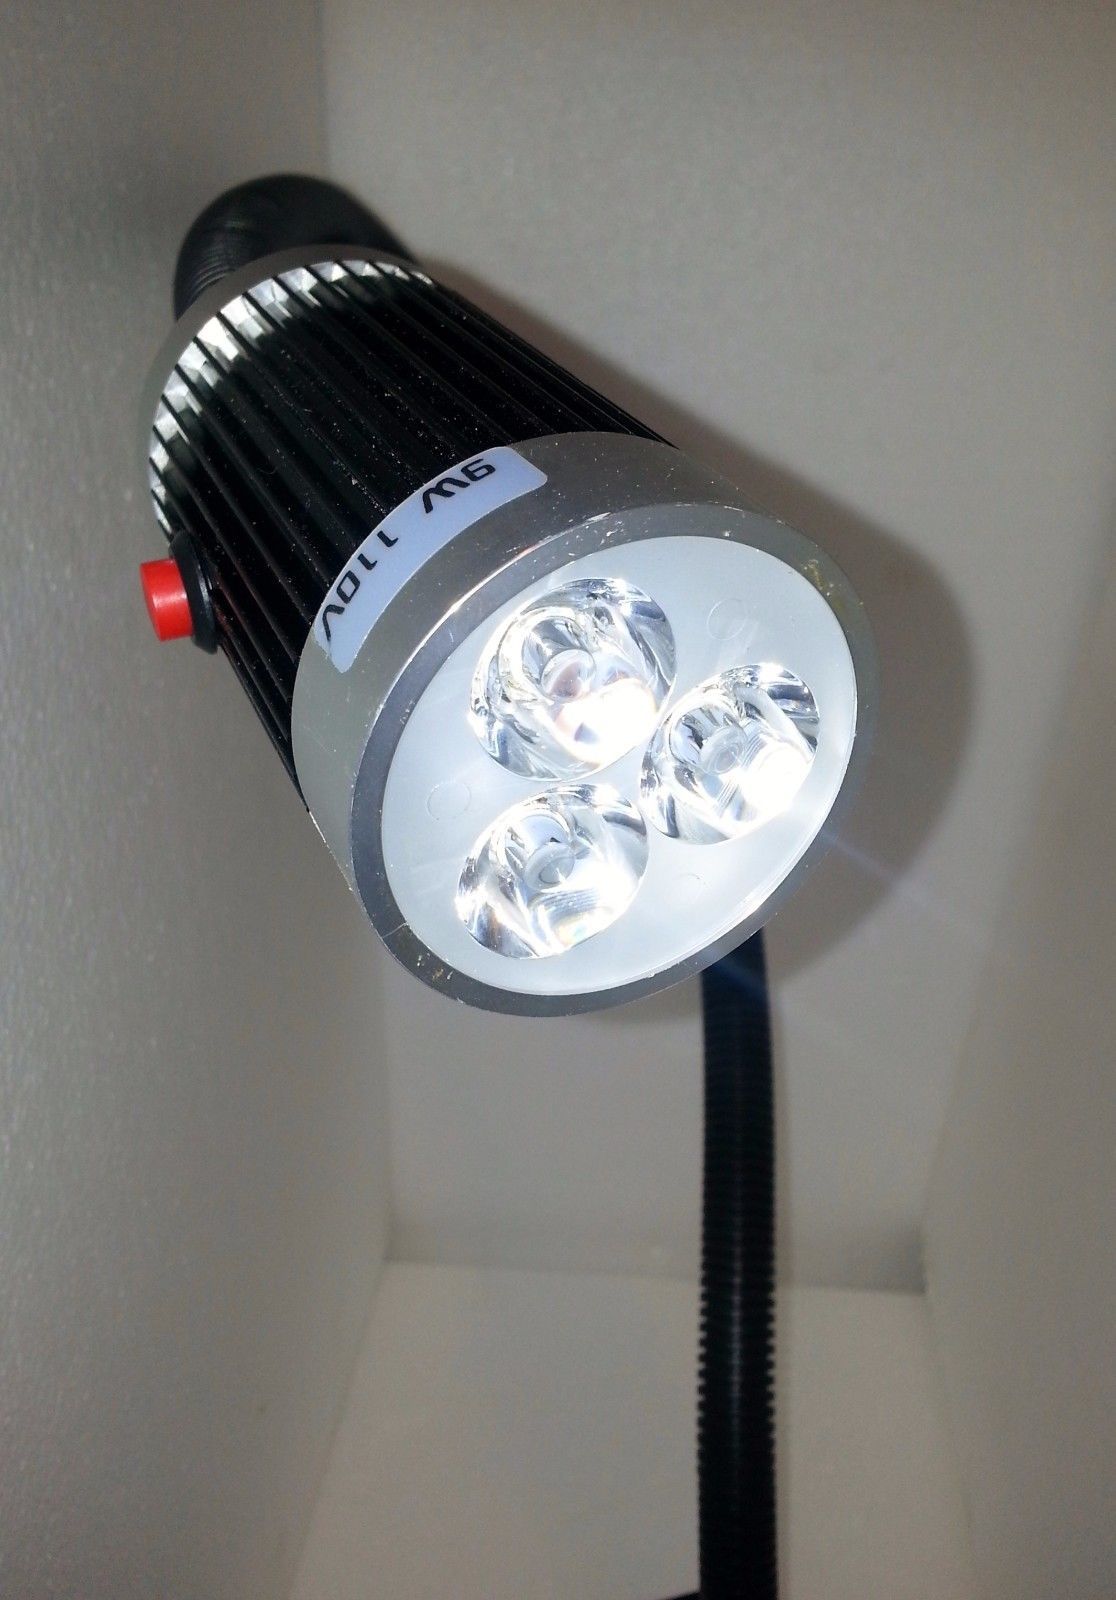 LED Machine Lamp Super Bright with Heavy Duty Magnetic Base